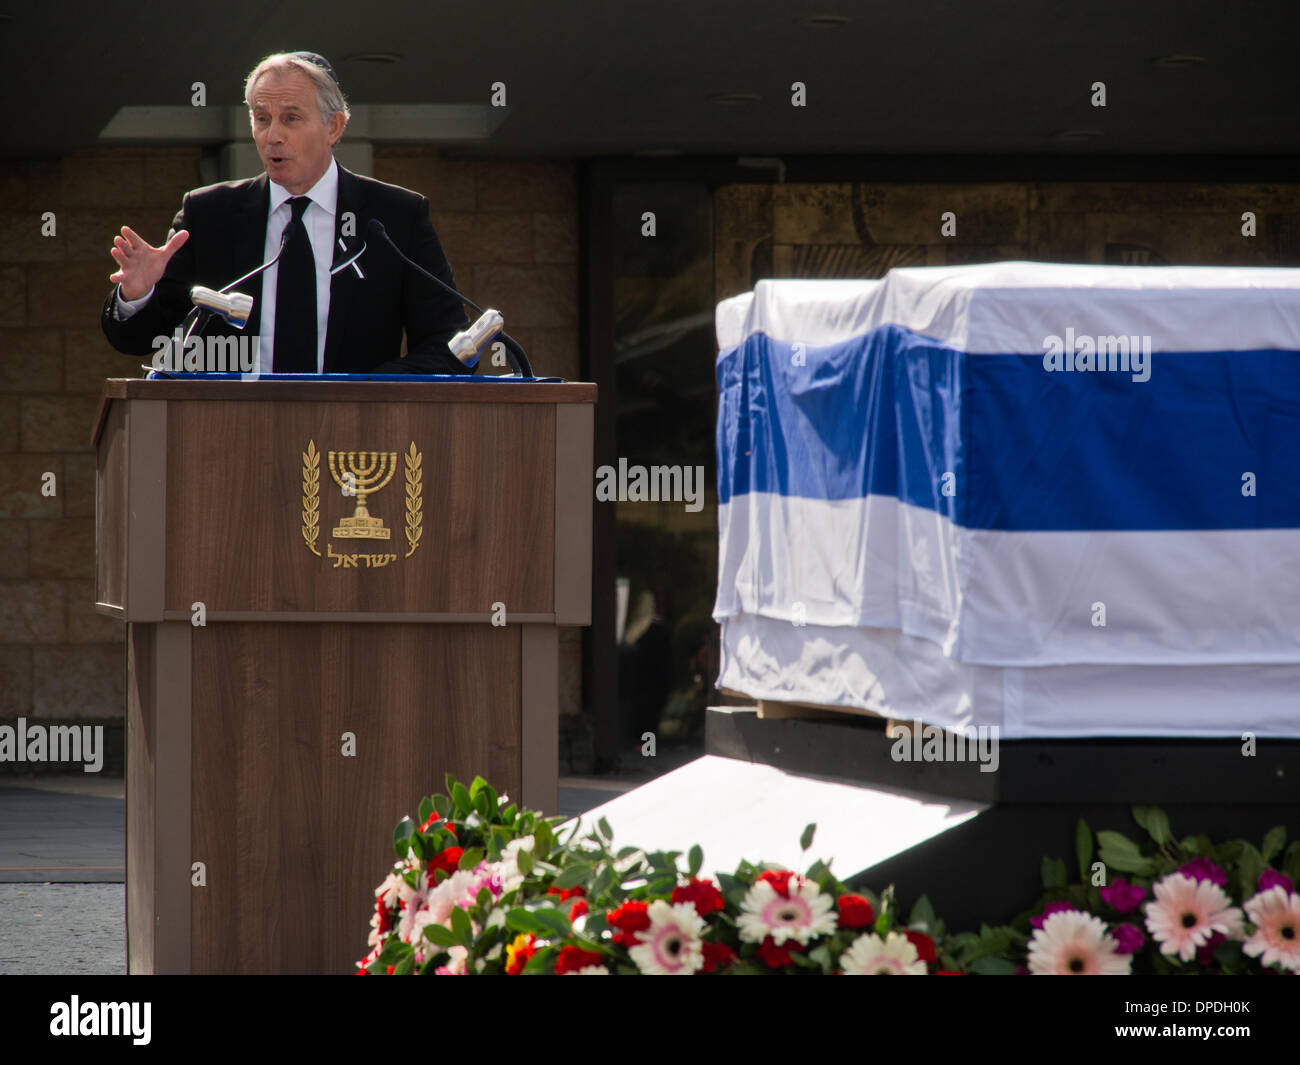 Former British PM, Tony Blair, delivers a eulogy for former Israeli Prime Minister, Ariel Sharon, at a state memorial ceremony in the Knesset plaza. Over twenty international delegations attended the ceremony, paying last respects to Sharon. Jerusalem, Israel. 13-Jan-2014.  A state memorial ceremony was held at the Knesset for Former PM Ariel Sharon. President Peres, PM Netanyahu, Knesset Speaker Edelstein, US Vice President Biden and former British PM Blair delivered eulogies. Sharon passed away Saturday at age 85. Stock Photo